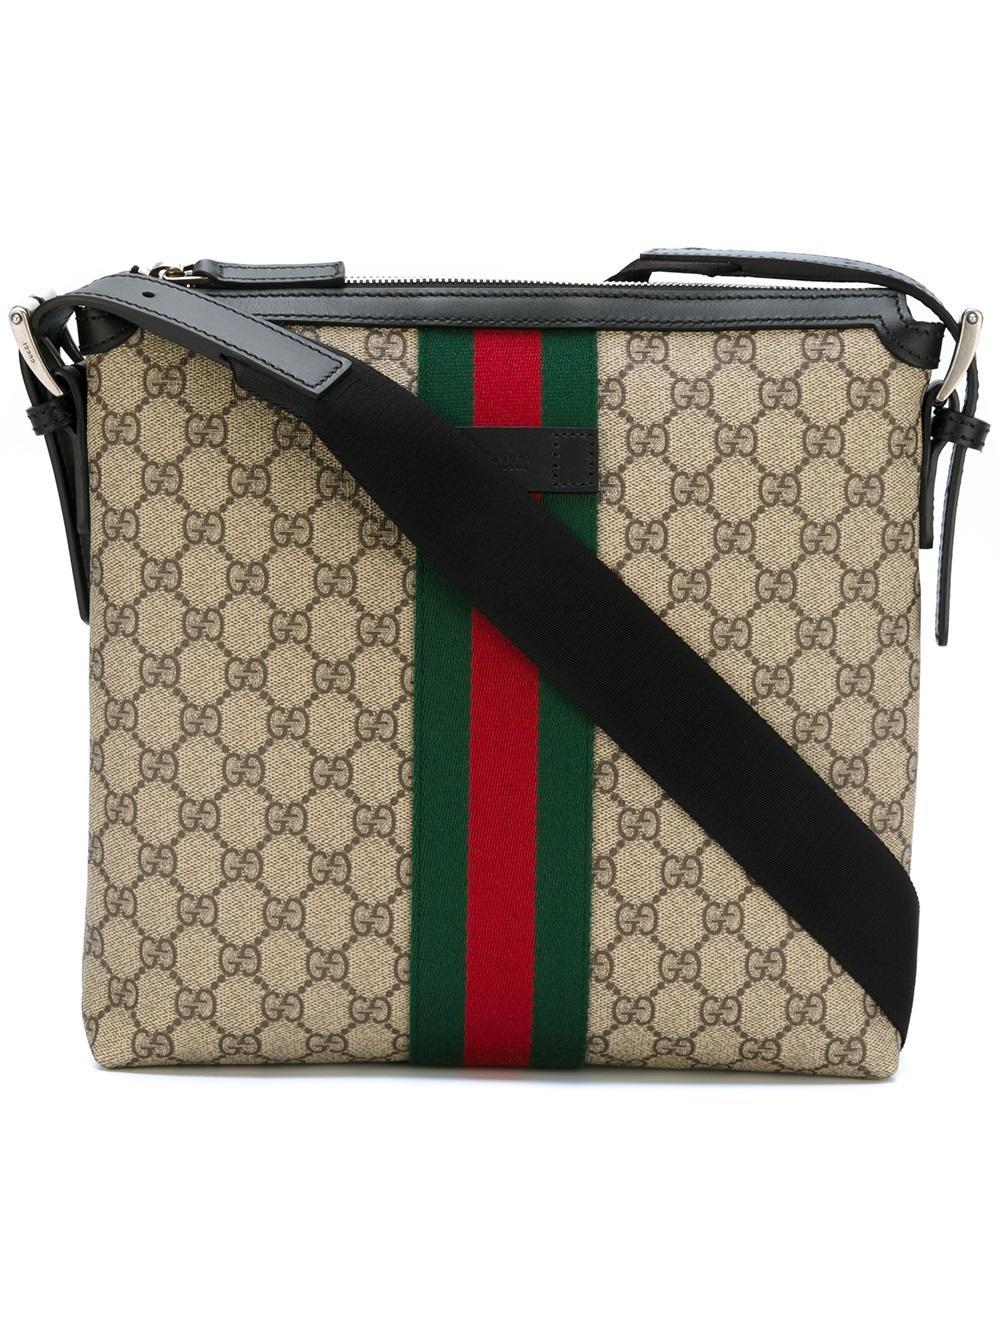 Gucci Cotton Gg Supreme Messenger Bag With Web Detail in Black for Men - Lyst